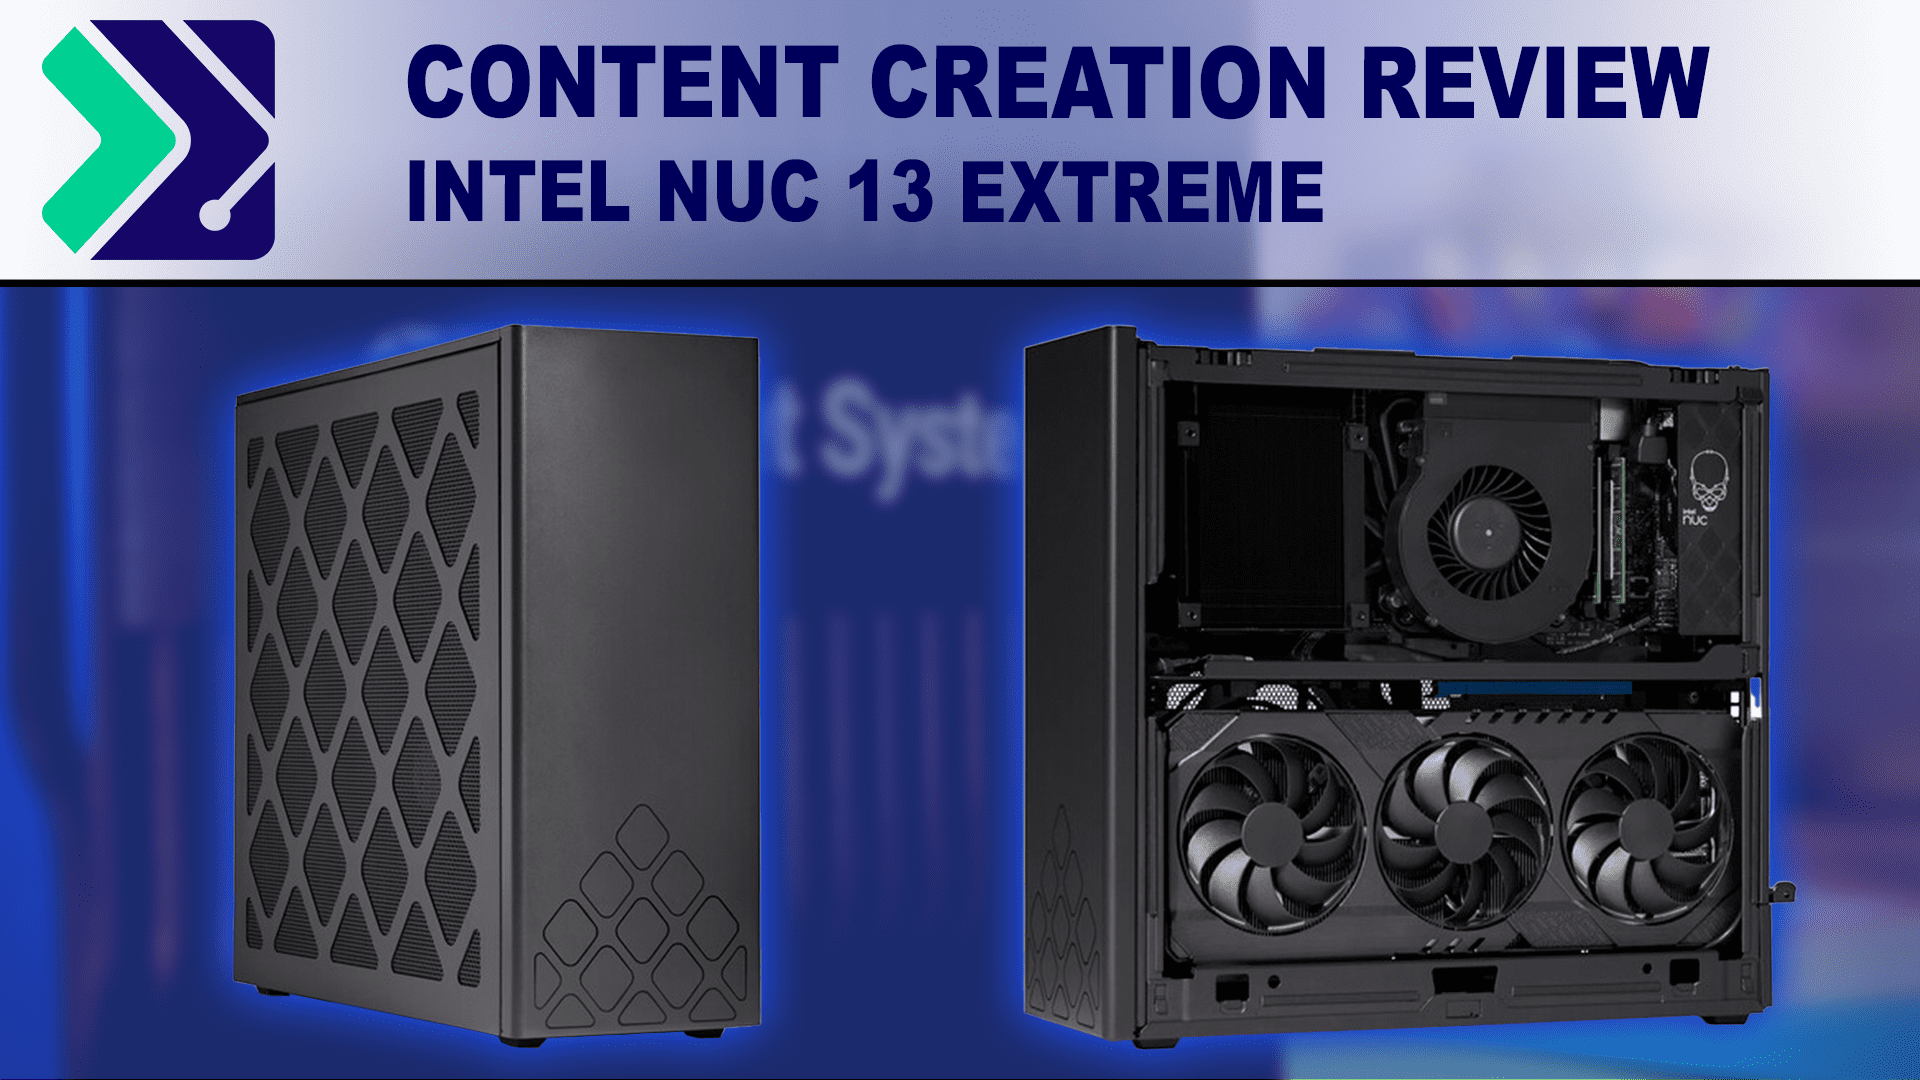 Intel NUC 13 Extreme Content Creation Review